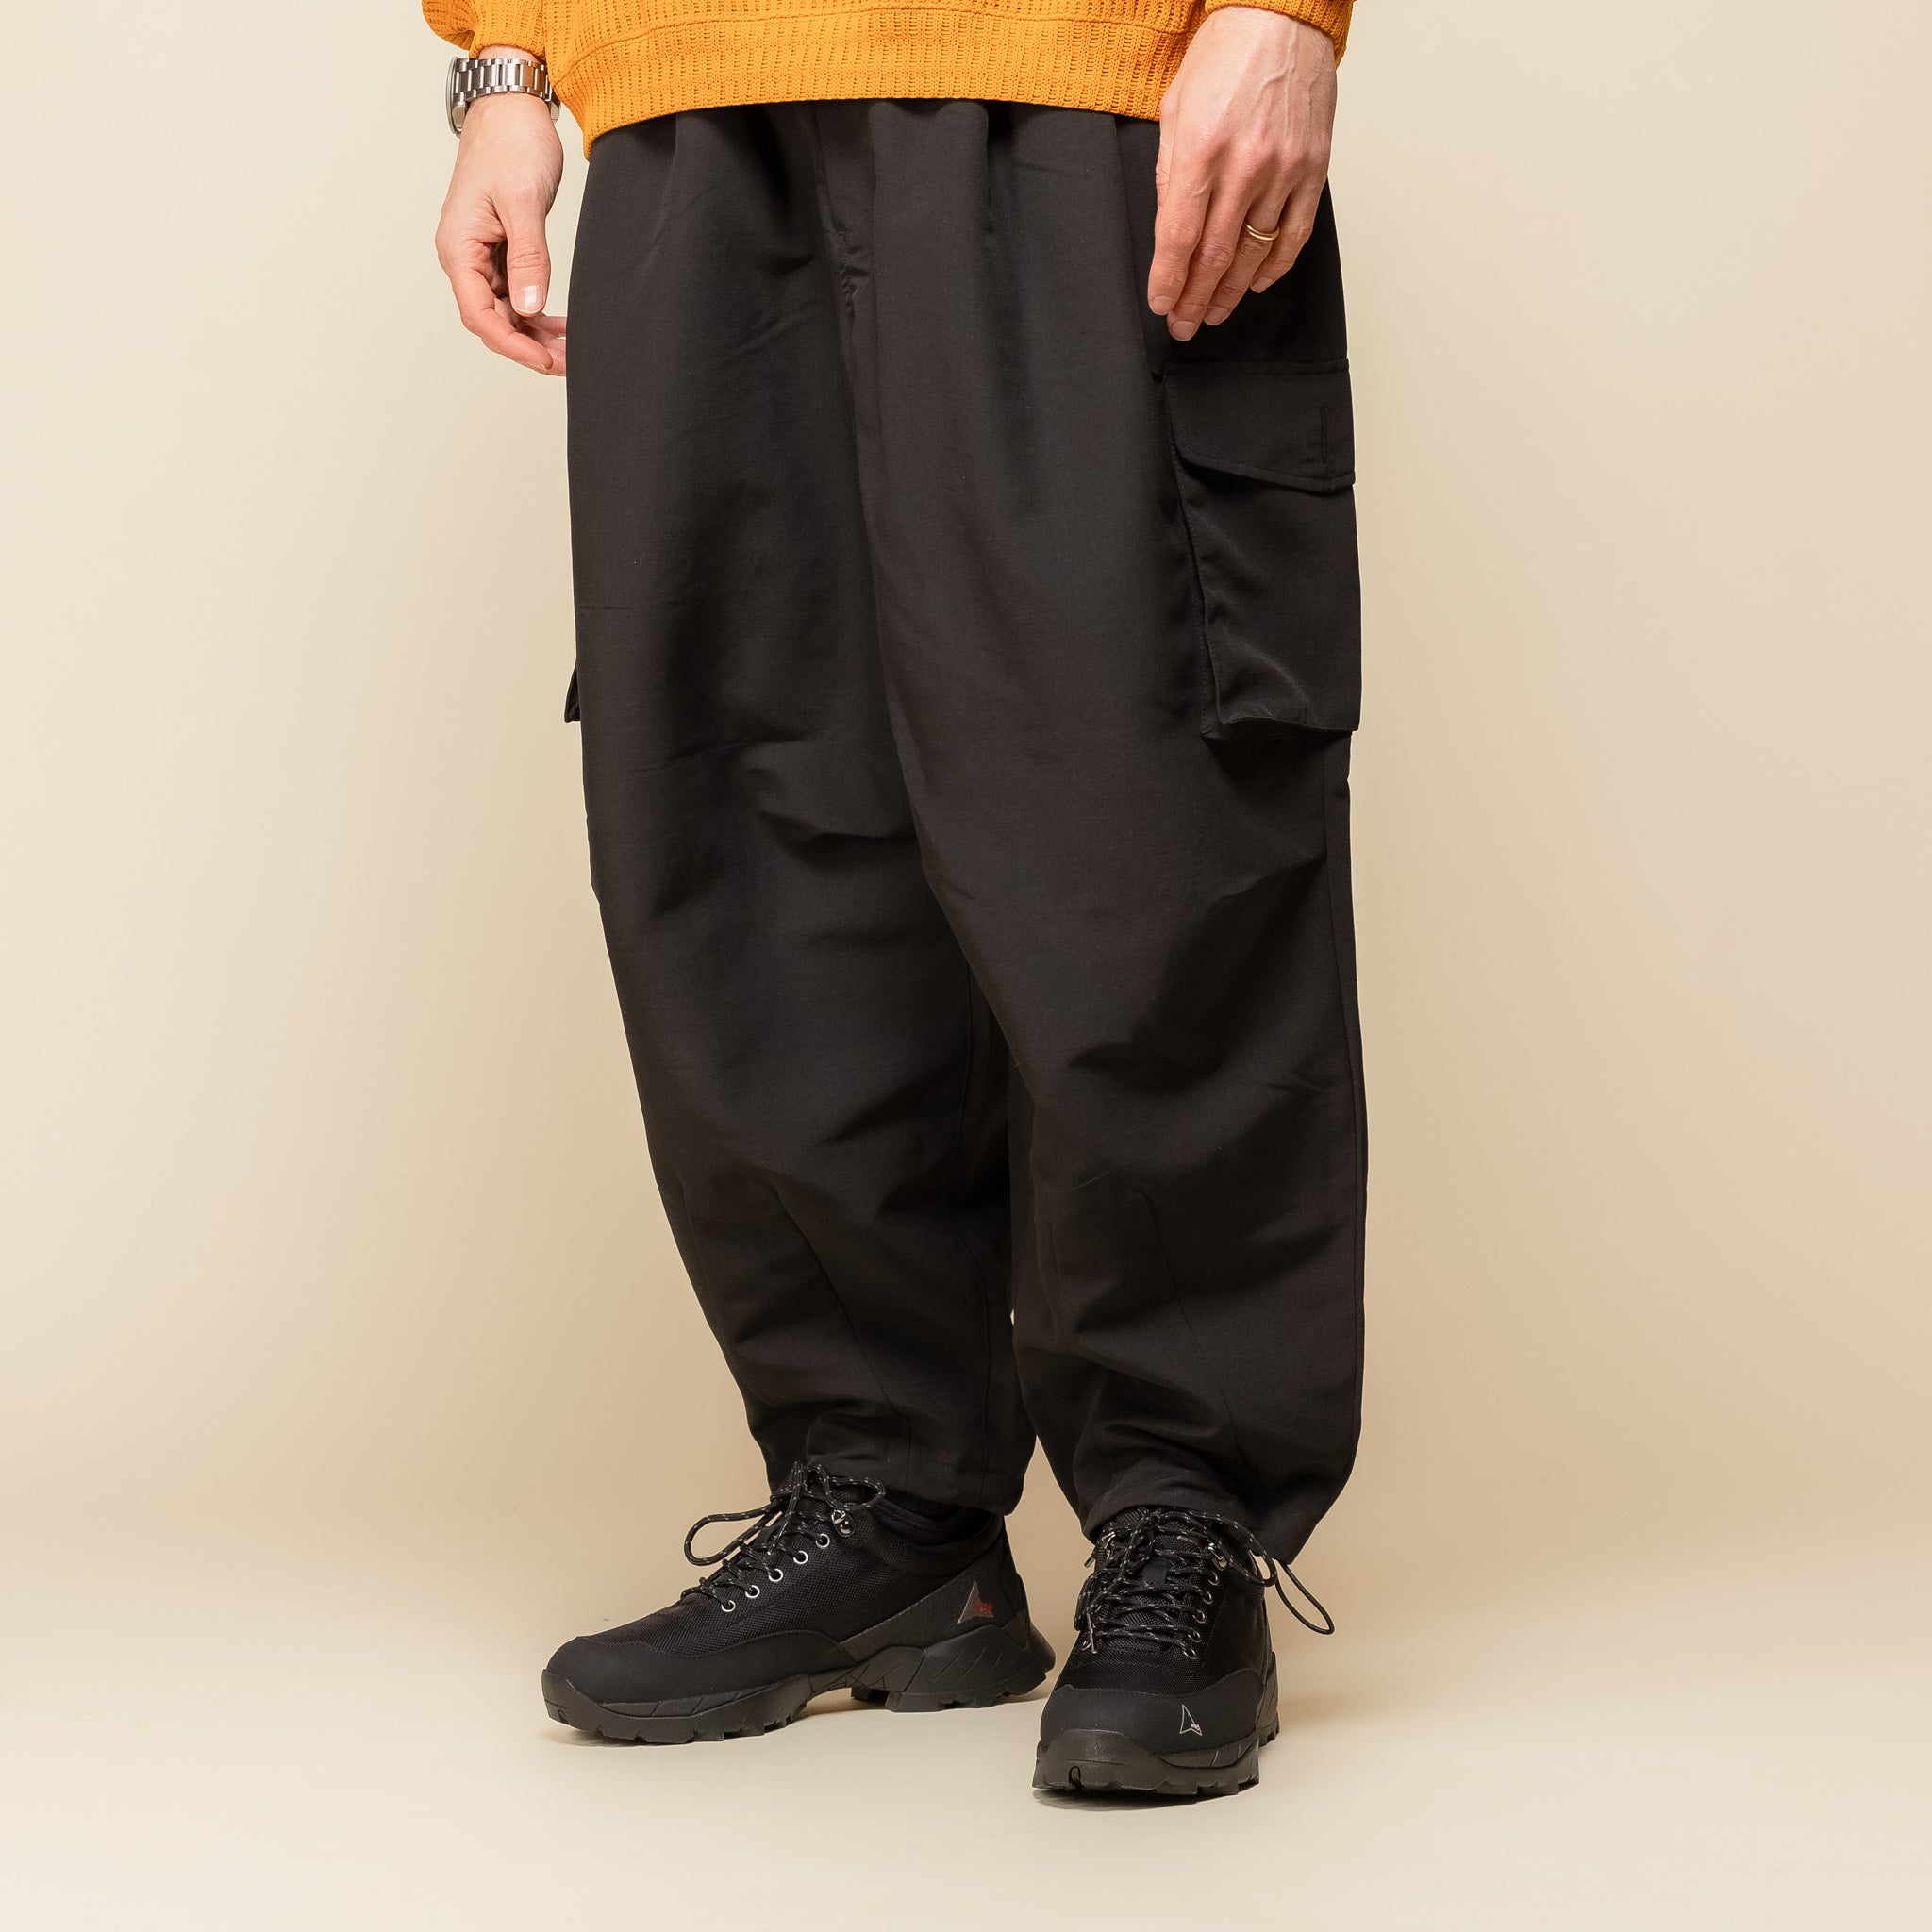 Tightbooth - T-65 Balloon Cargo Pants - Black "tightbooth stockists" "tightbooth Japan"